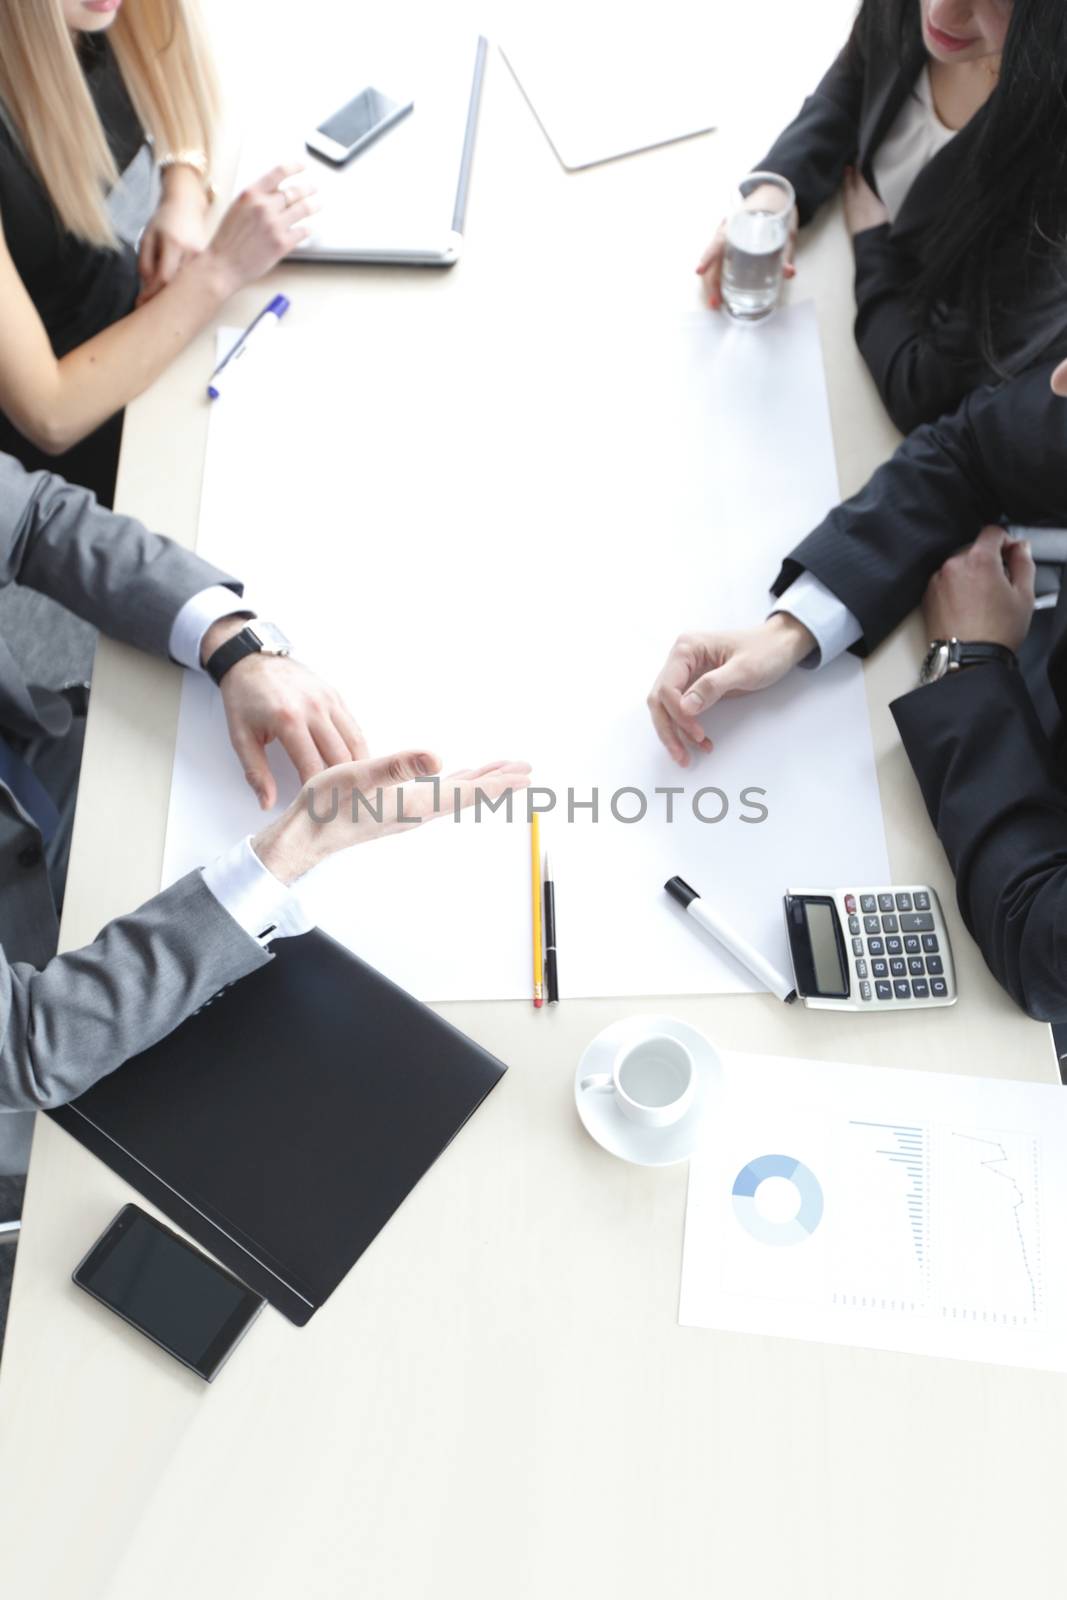 Business people brainstorming at office desk, they are analyzing financial reports and pointing out blank paper working with financial data, top view